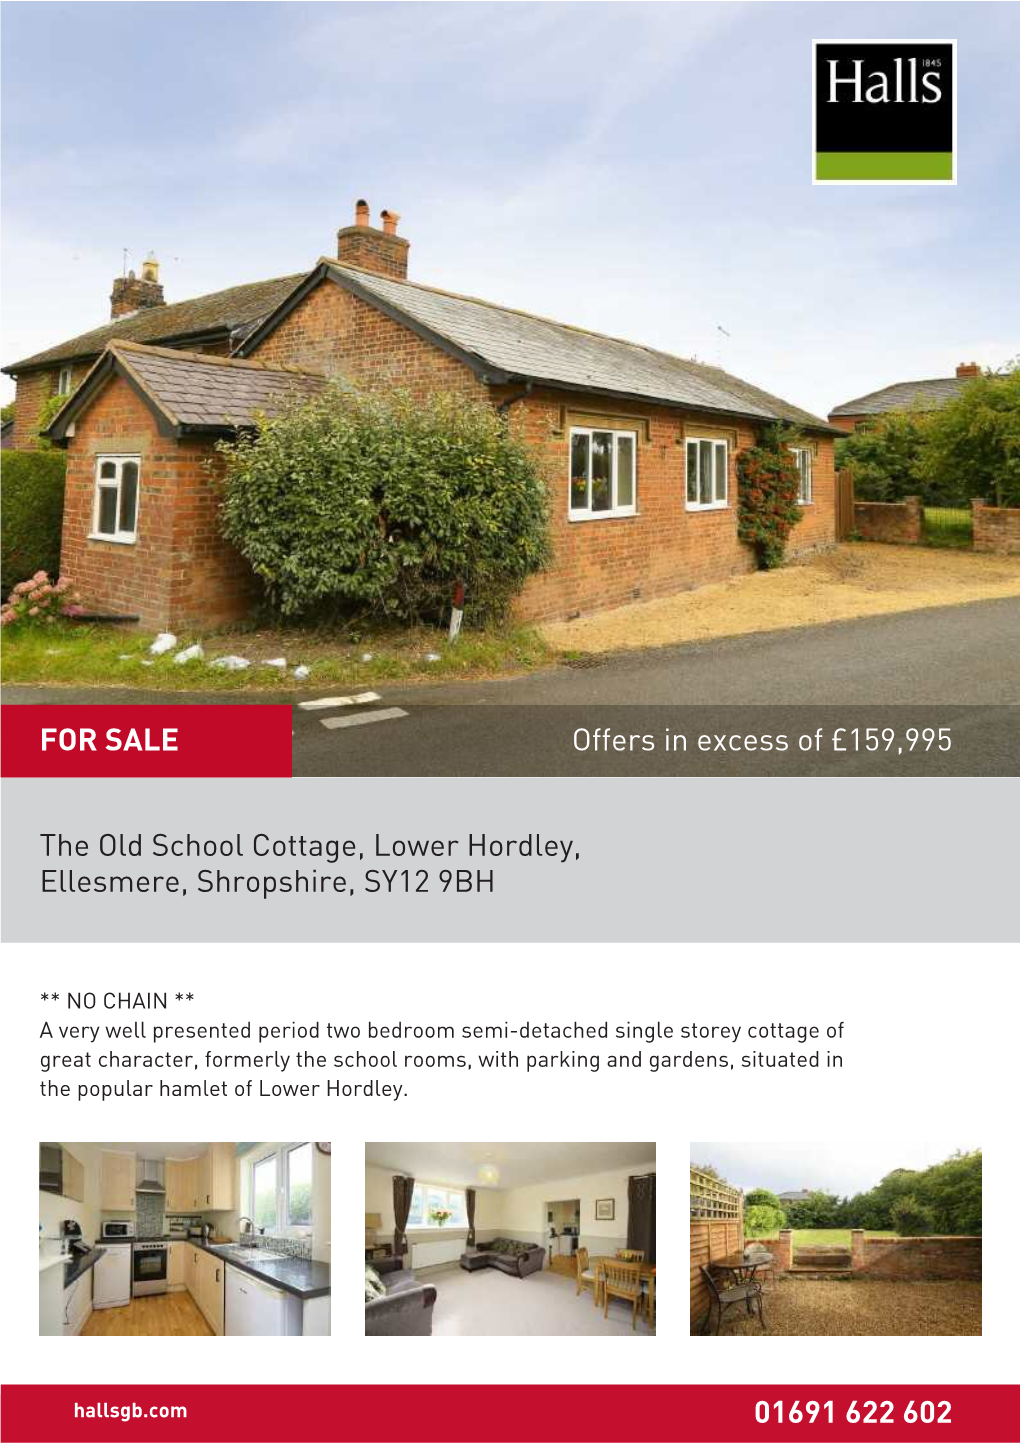 The Old School Cottage, Lower Hordley, Ellesmere, Shropshire, SY12 9BH